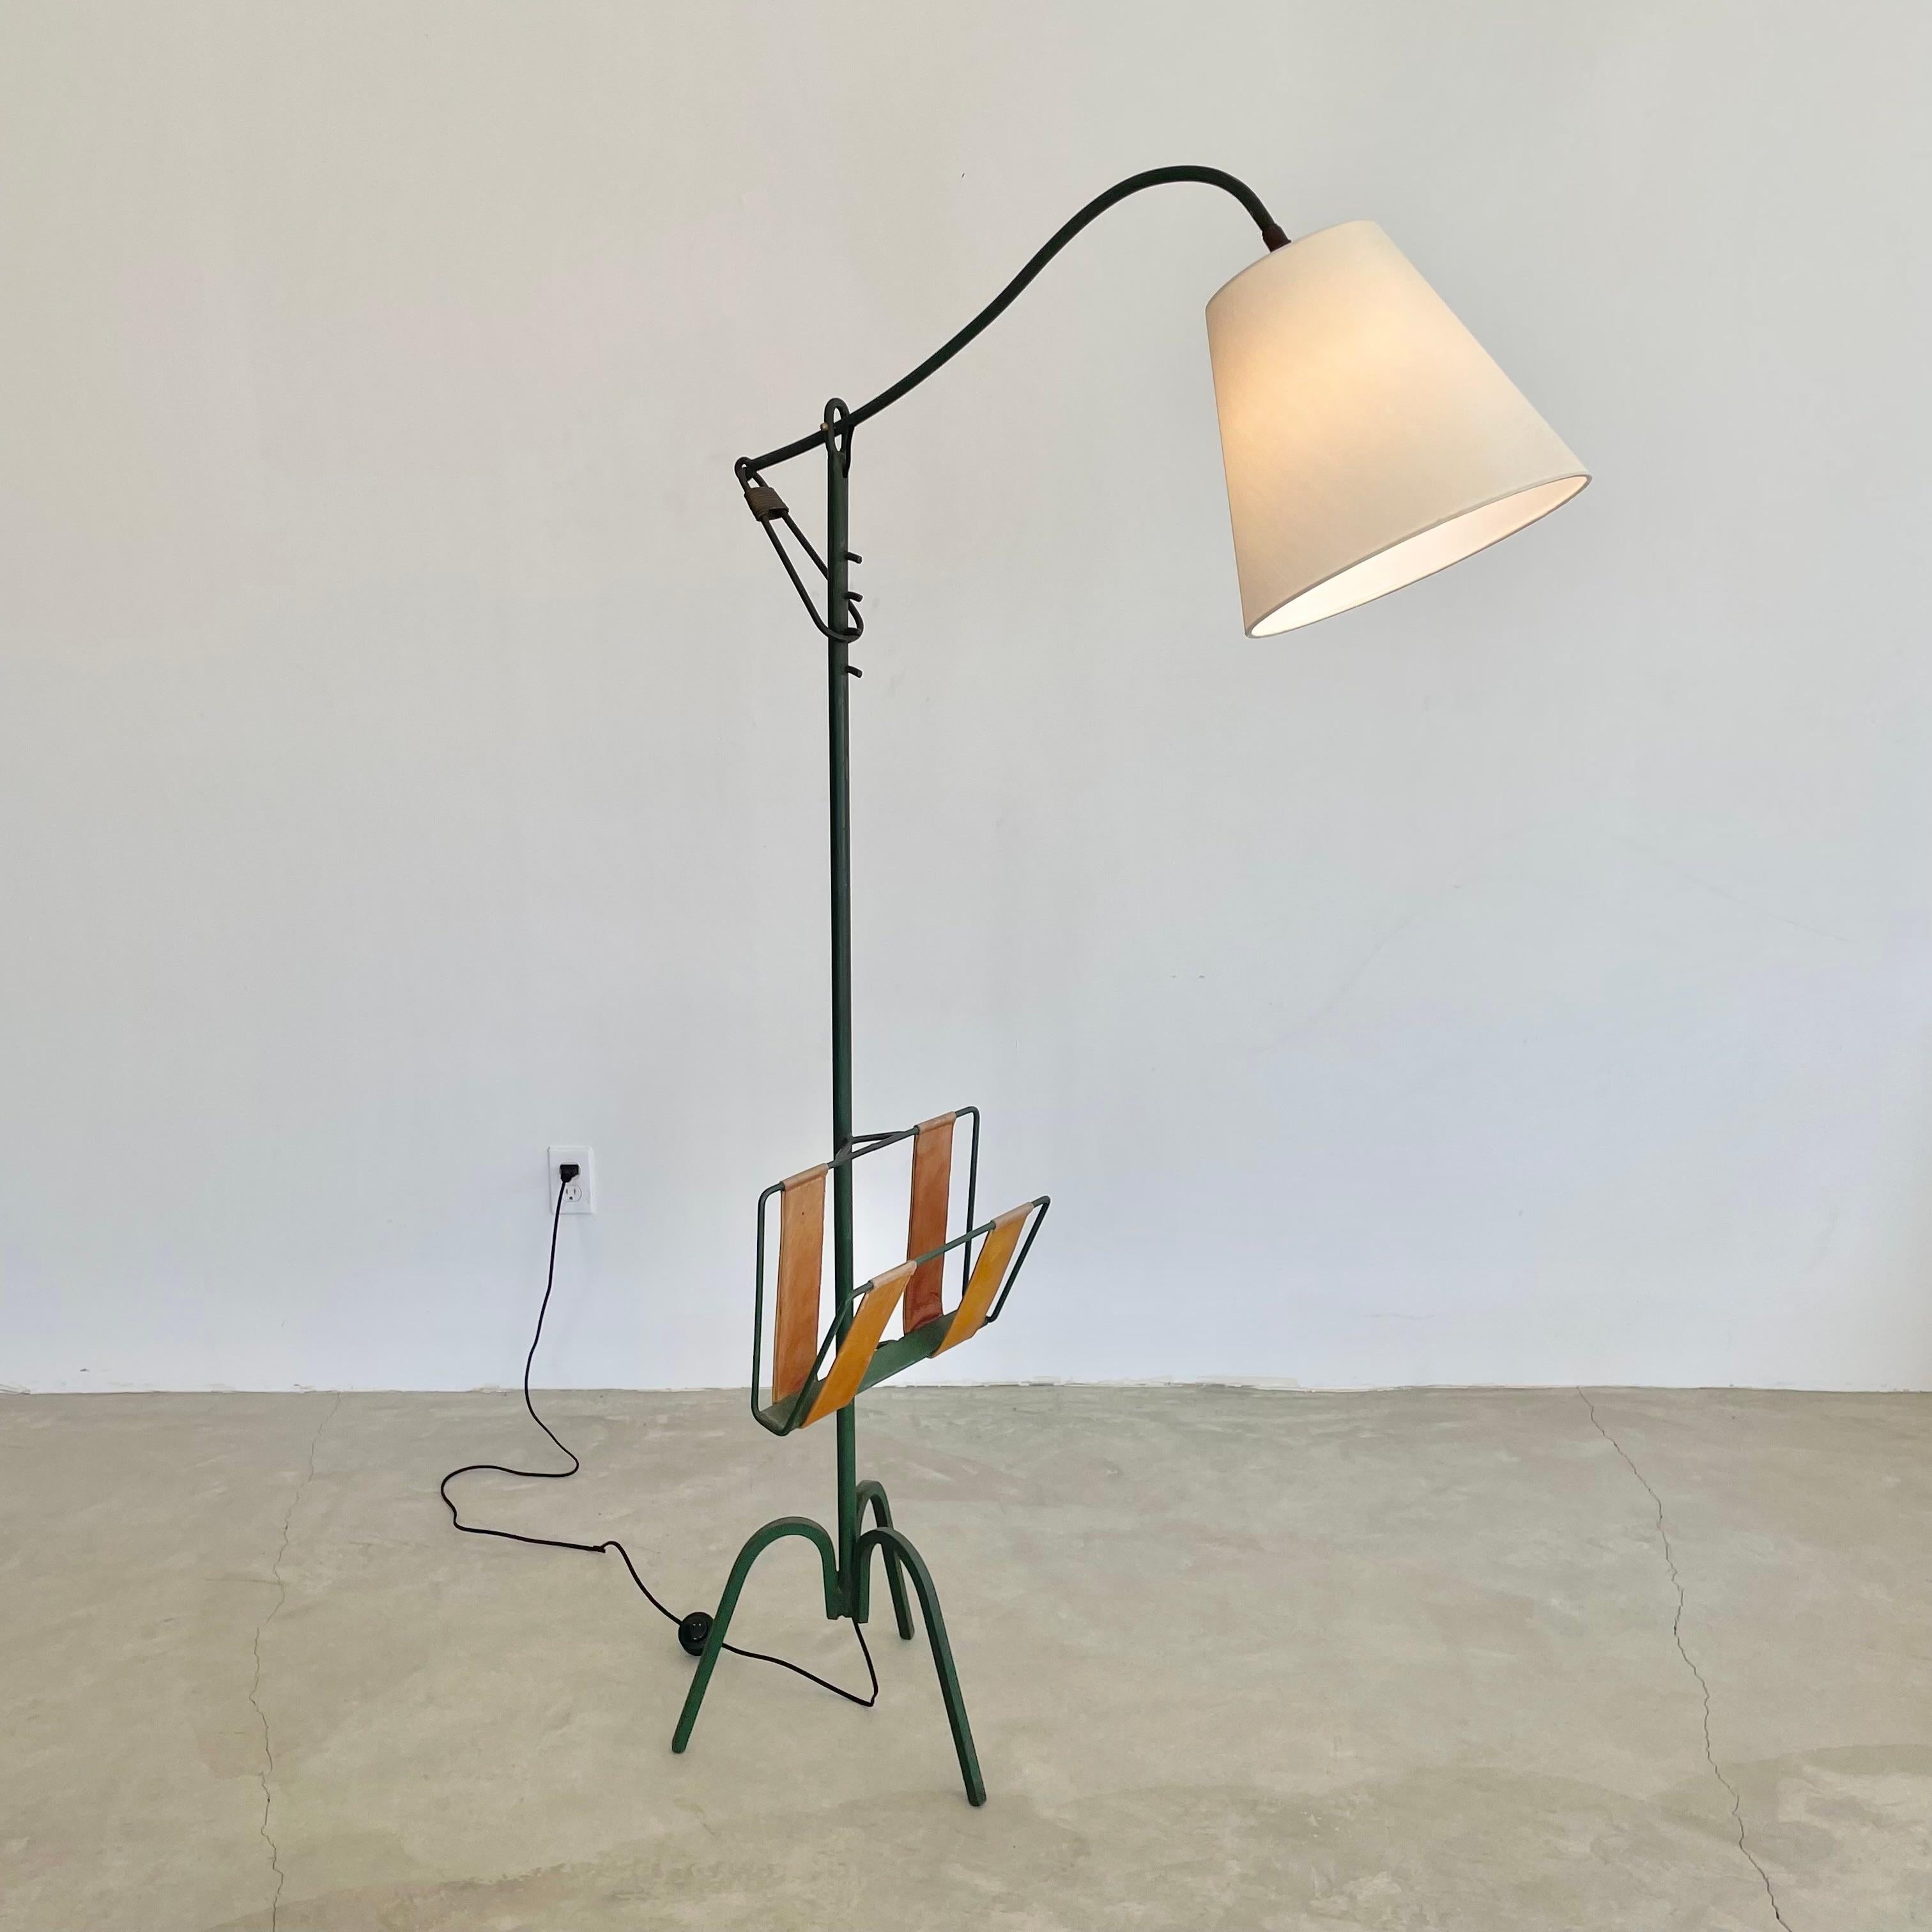 Mid-Century Modern Adjustable Iron Floor Lamp in the style of Jacques Adnet, 1950s France For Sale